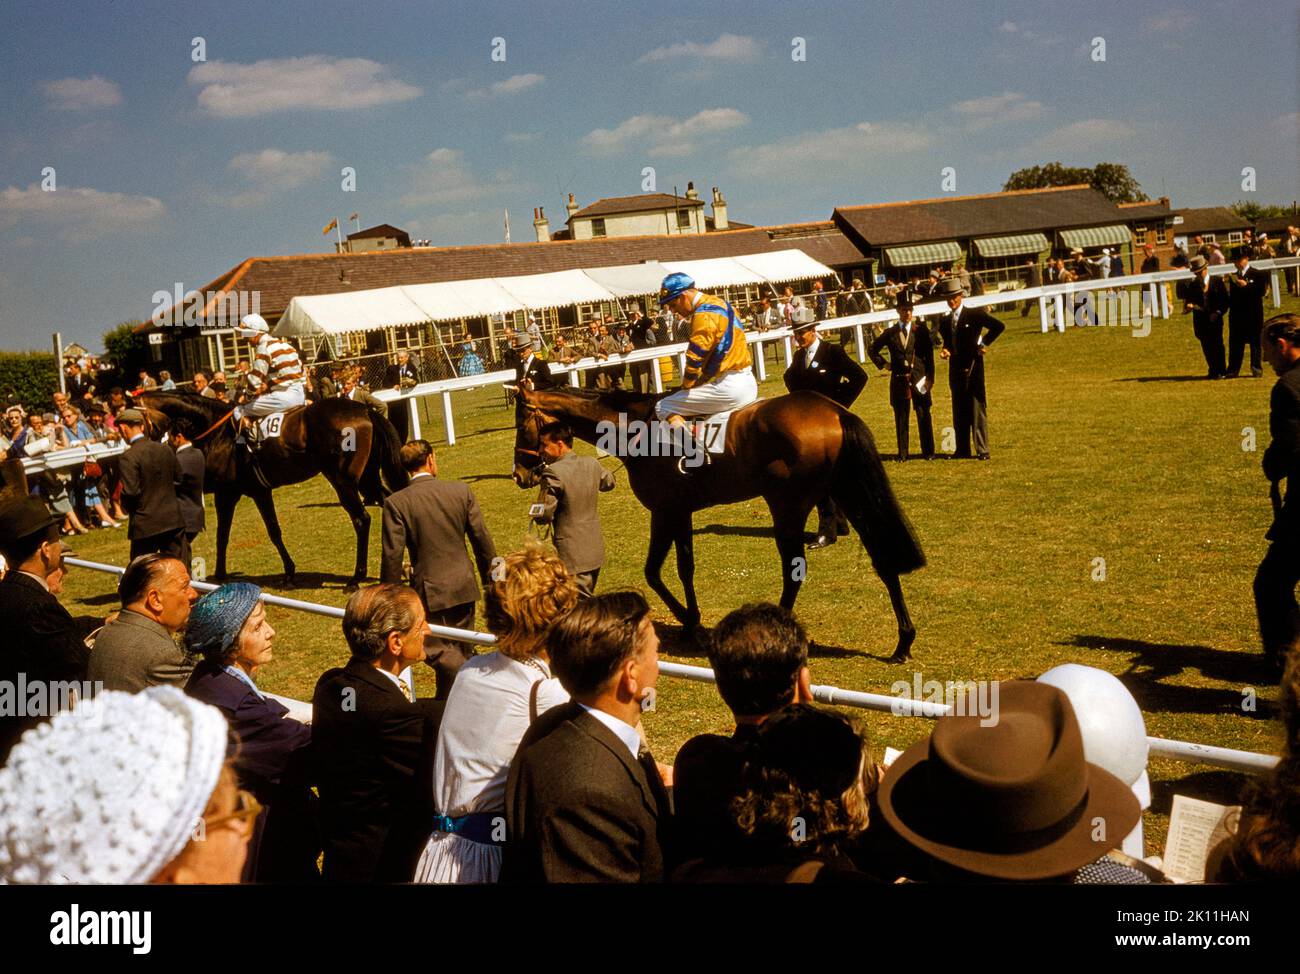 English Derby, Epsom Downs Racecourse, Epsom, Surrey, Inghilterra, UK, toni Frissell Collection, 3 giugno 1959 Foto Stock